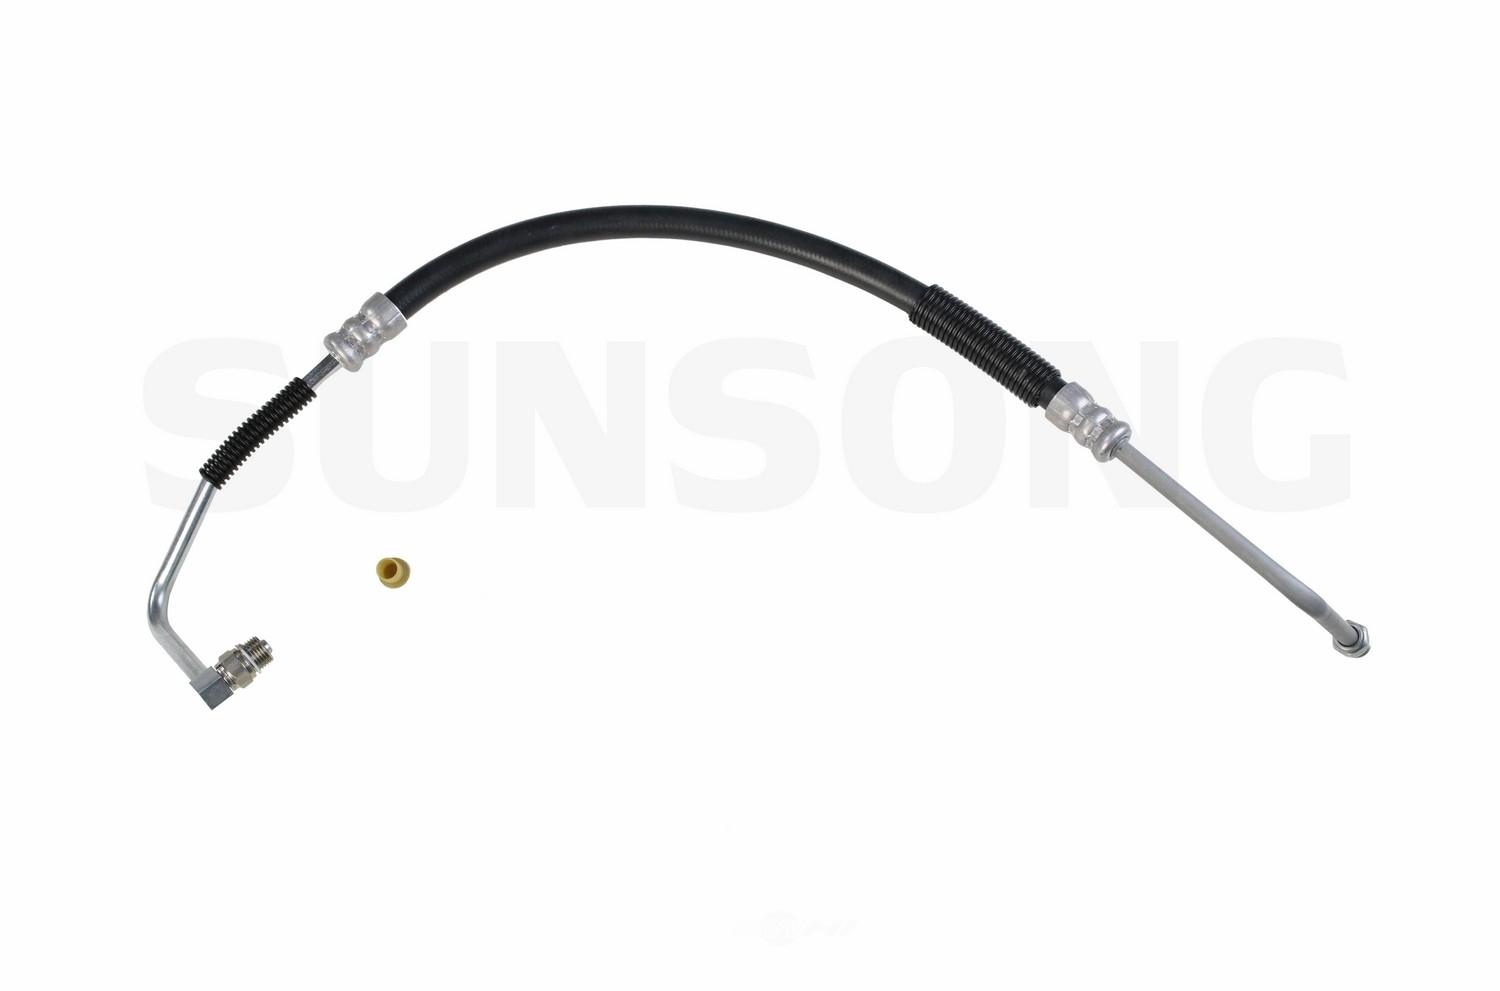 SUNSONG NORTH AMERICA - Power Steering Pressure Line Hose Assembly (Pump To Hydroboost) - SUG 3401363